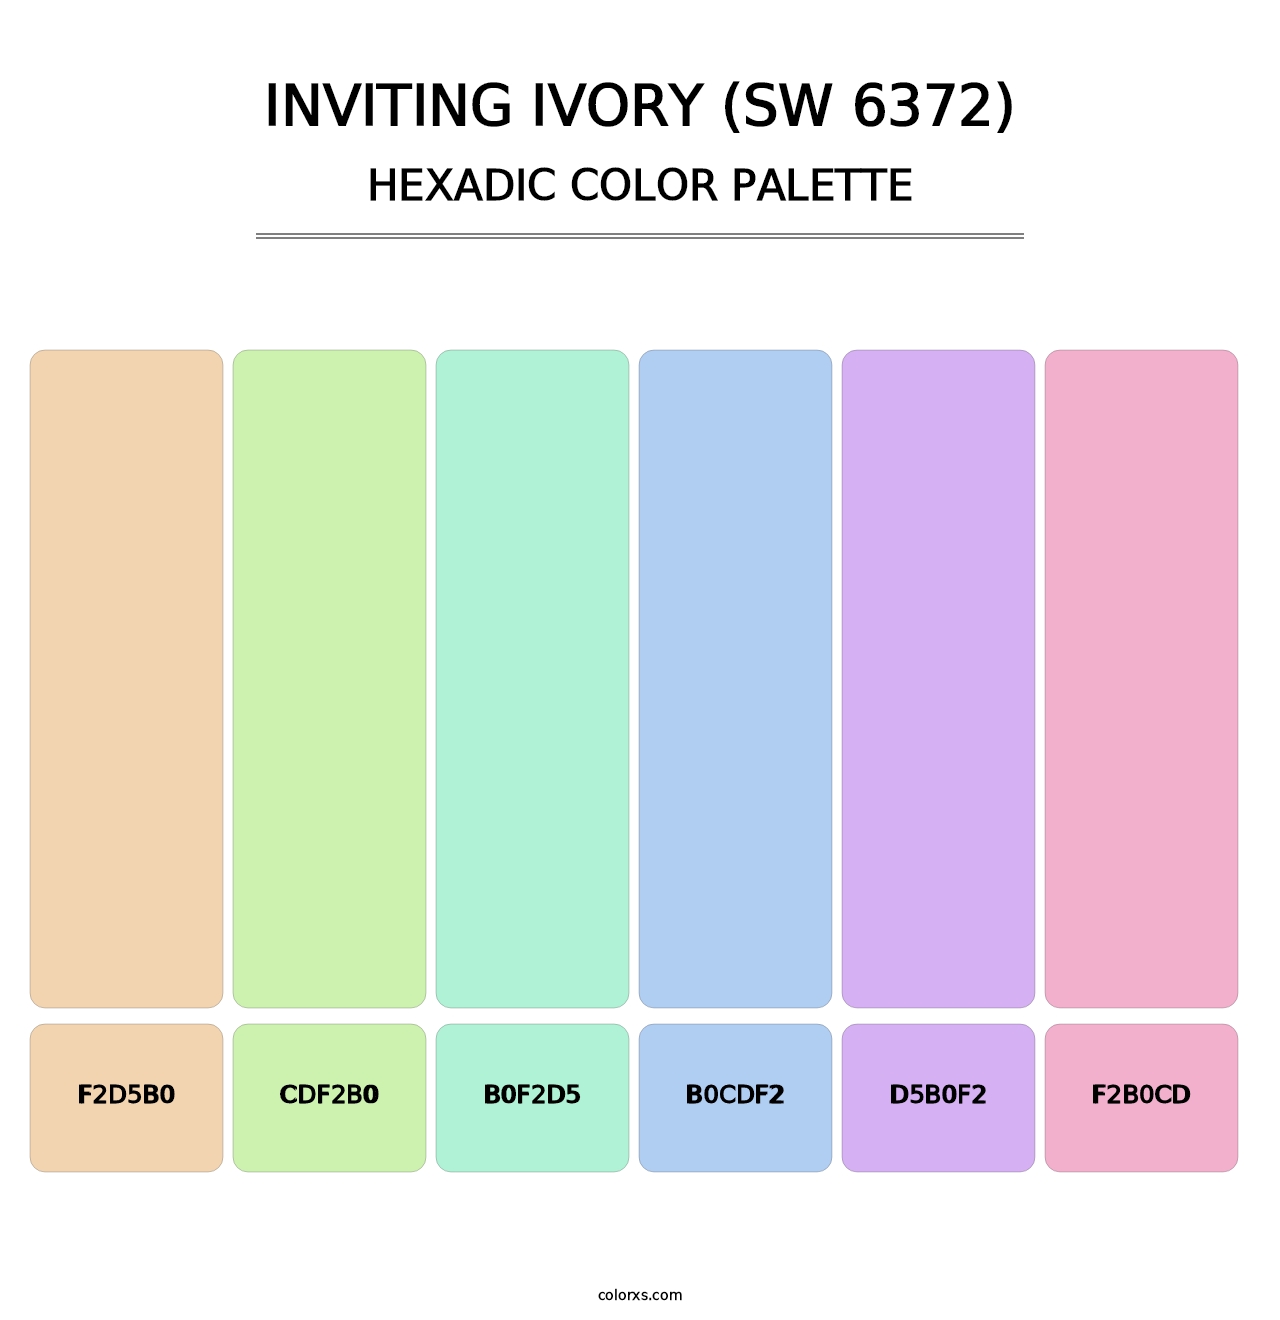 Inviting Ivory (SW 6372) - Hexadic Color Palette